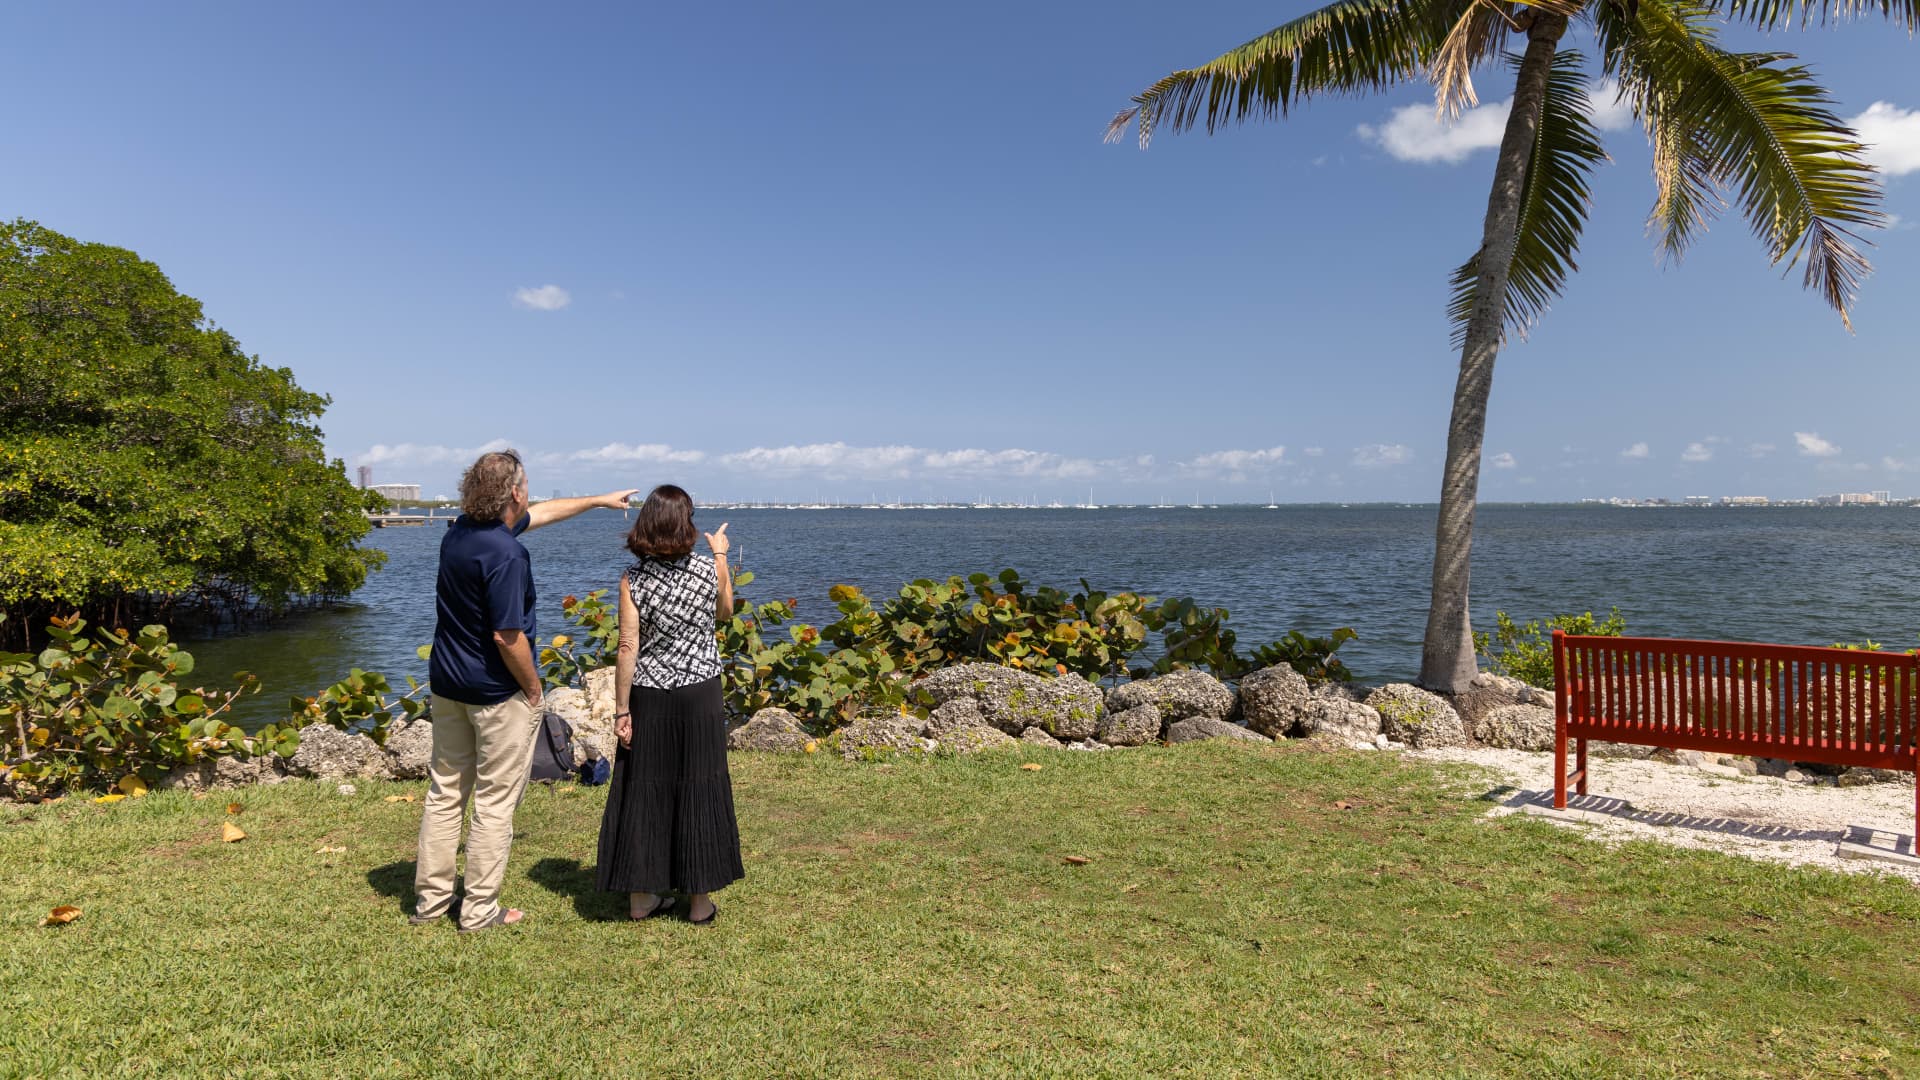 Todd Crowl and Rita Teutonico of Florida International University look toward Biscayne Bay. At left is one of the City of Miami's few remaining stands of mangroves.